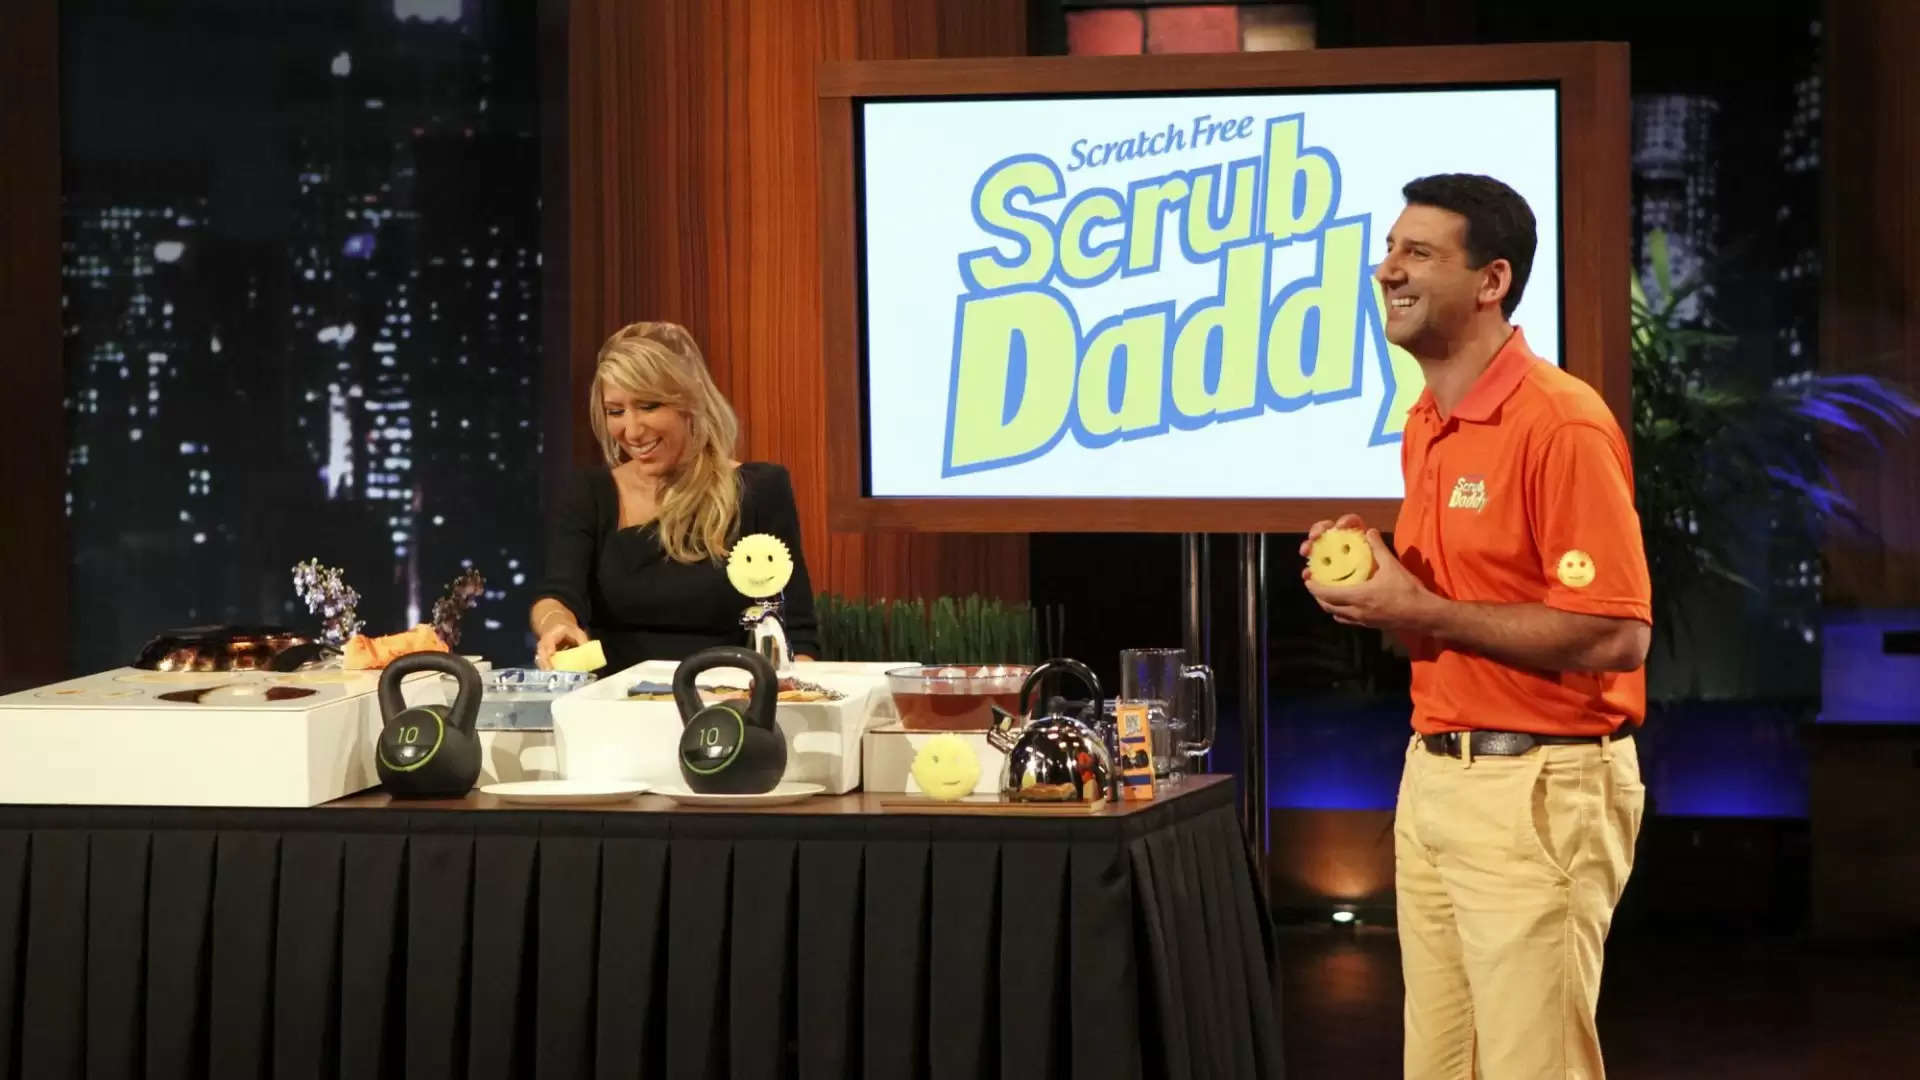 The 10 Most Successful Shark Tank Products That Made Millions